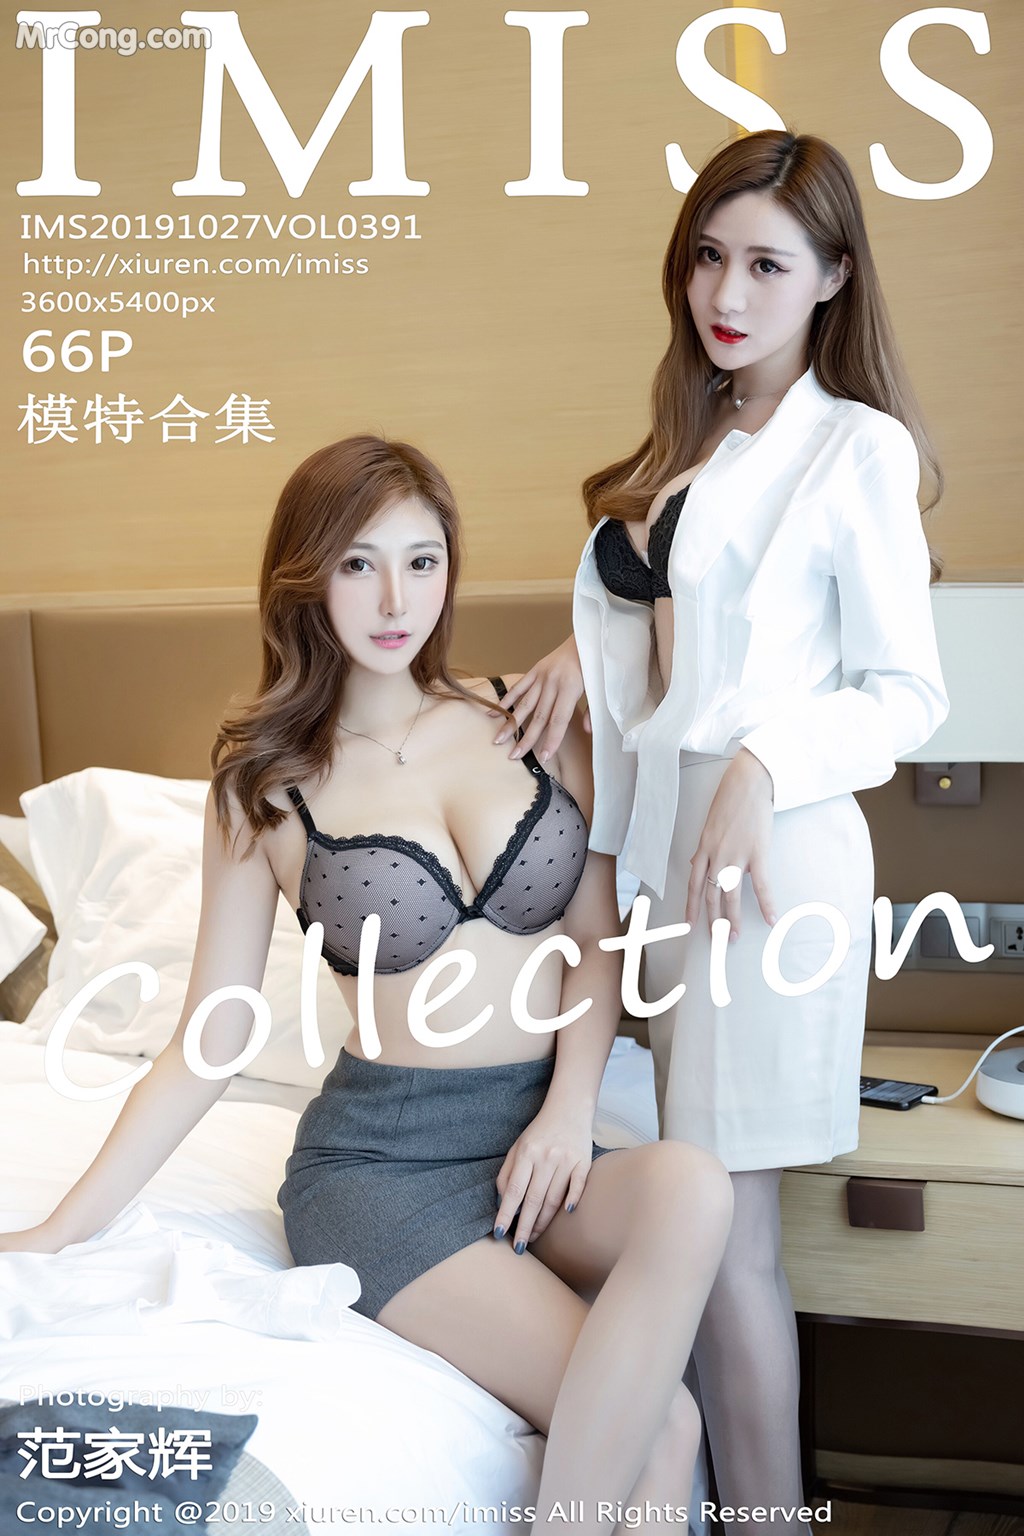 IMISS Vol.391: Various Models (67 pictures)